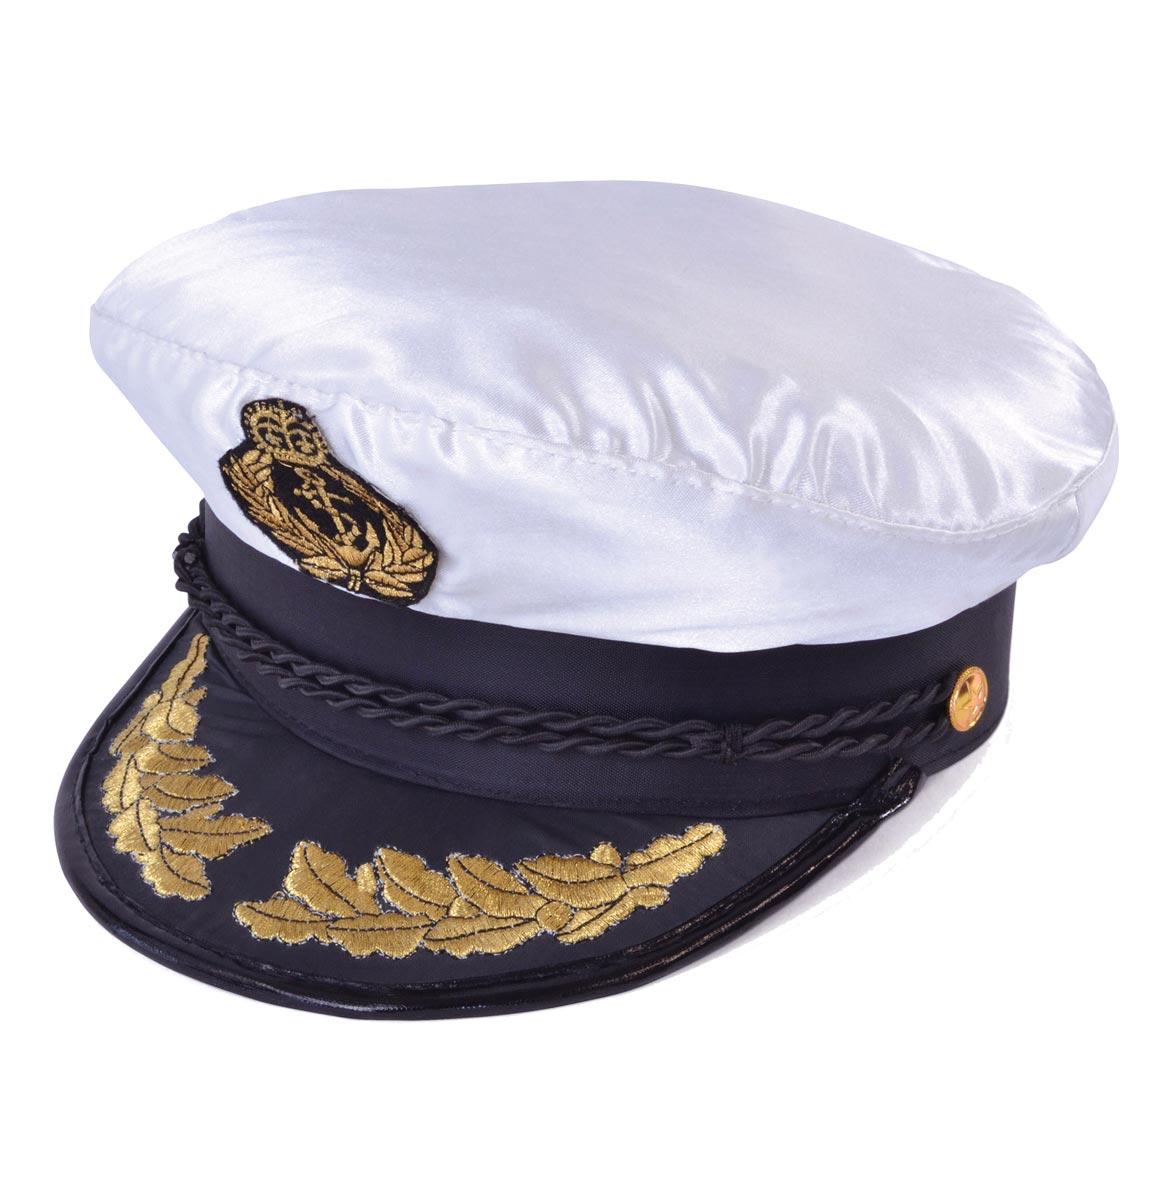 Ship's Captain Cap or Naval Officer Uniform Hat by Bristol Novelty BH471 and available here at Karnival Costumes online party shop